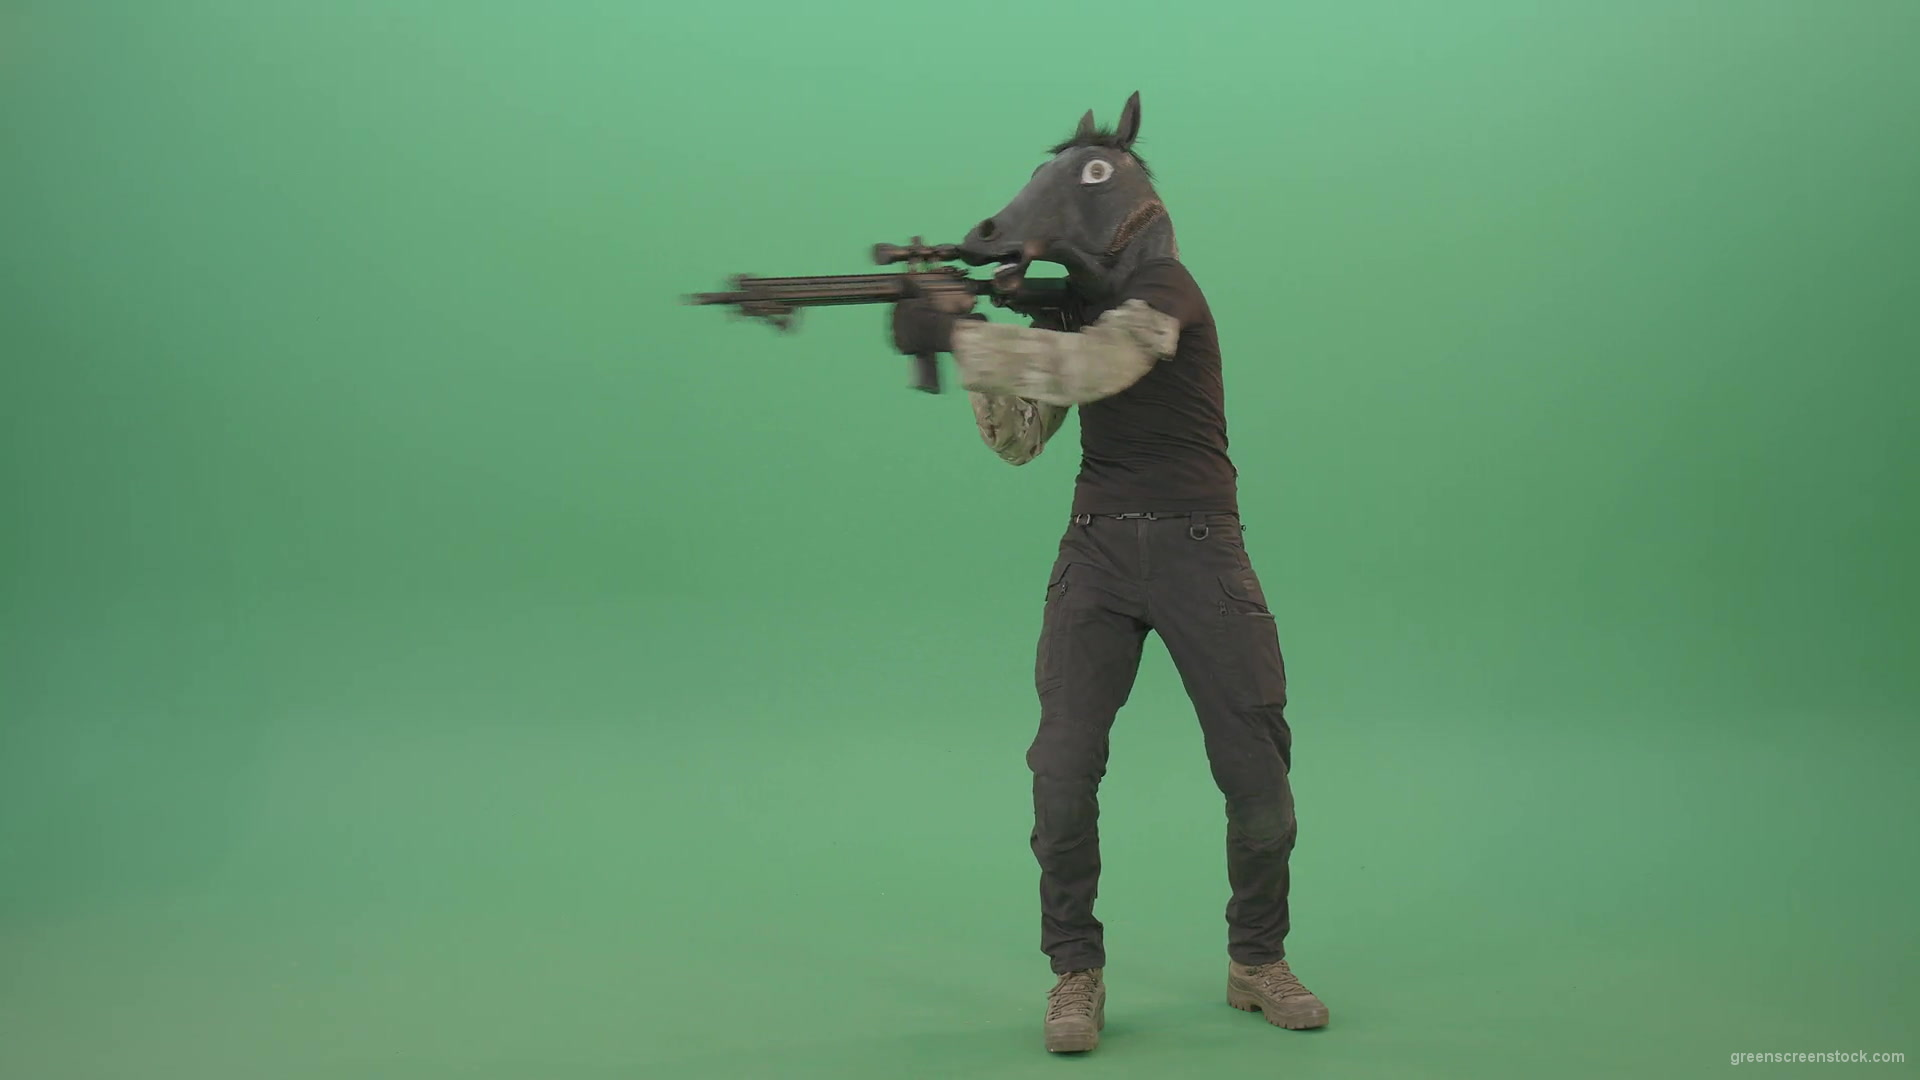 Front-view-Army-Man-in-horse-mask-shooting-from-Machine-Gun-isolated-on-Chromakey-Green-Screen-4K-Video-Footage-1920_002 Green Screen Stock